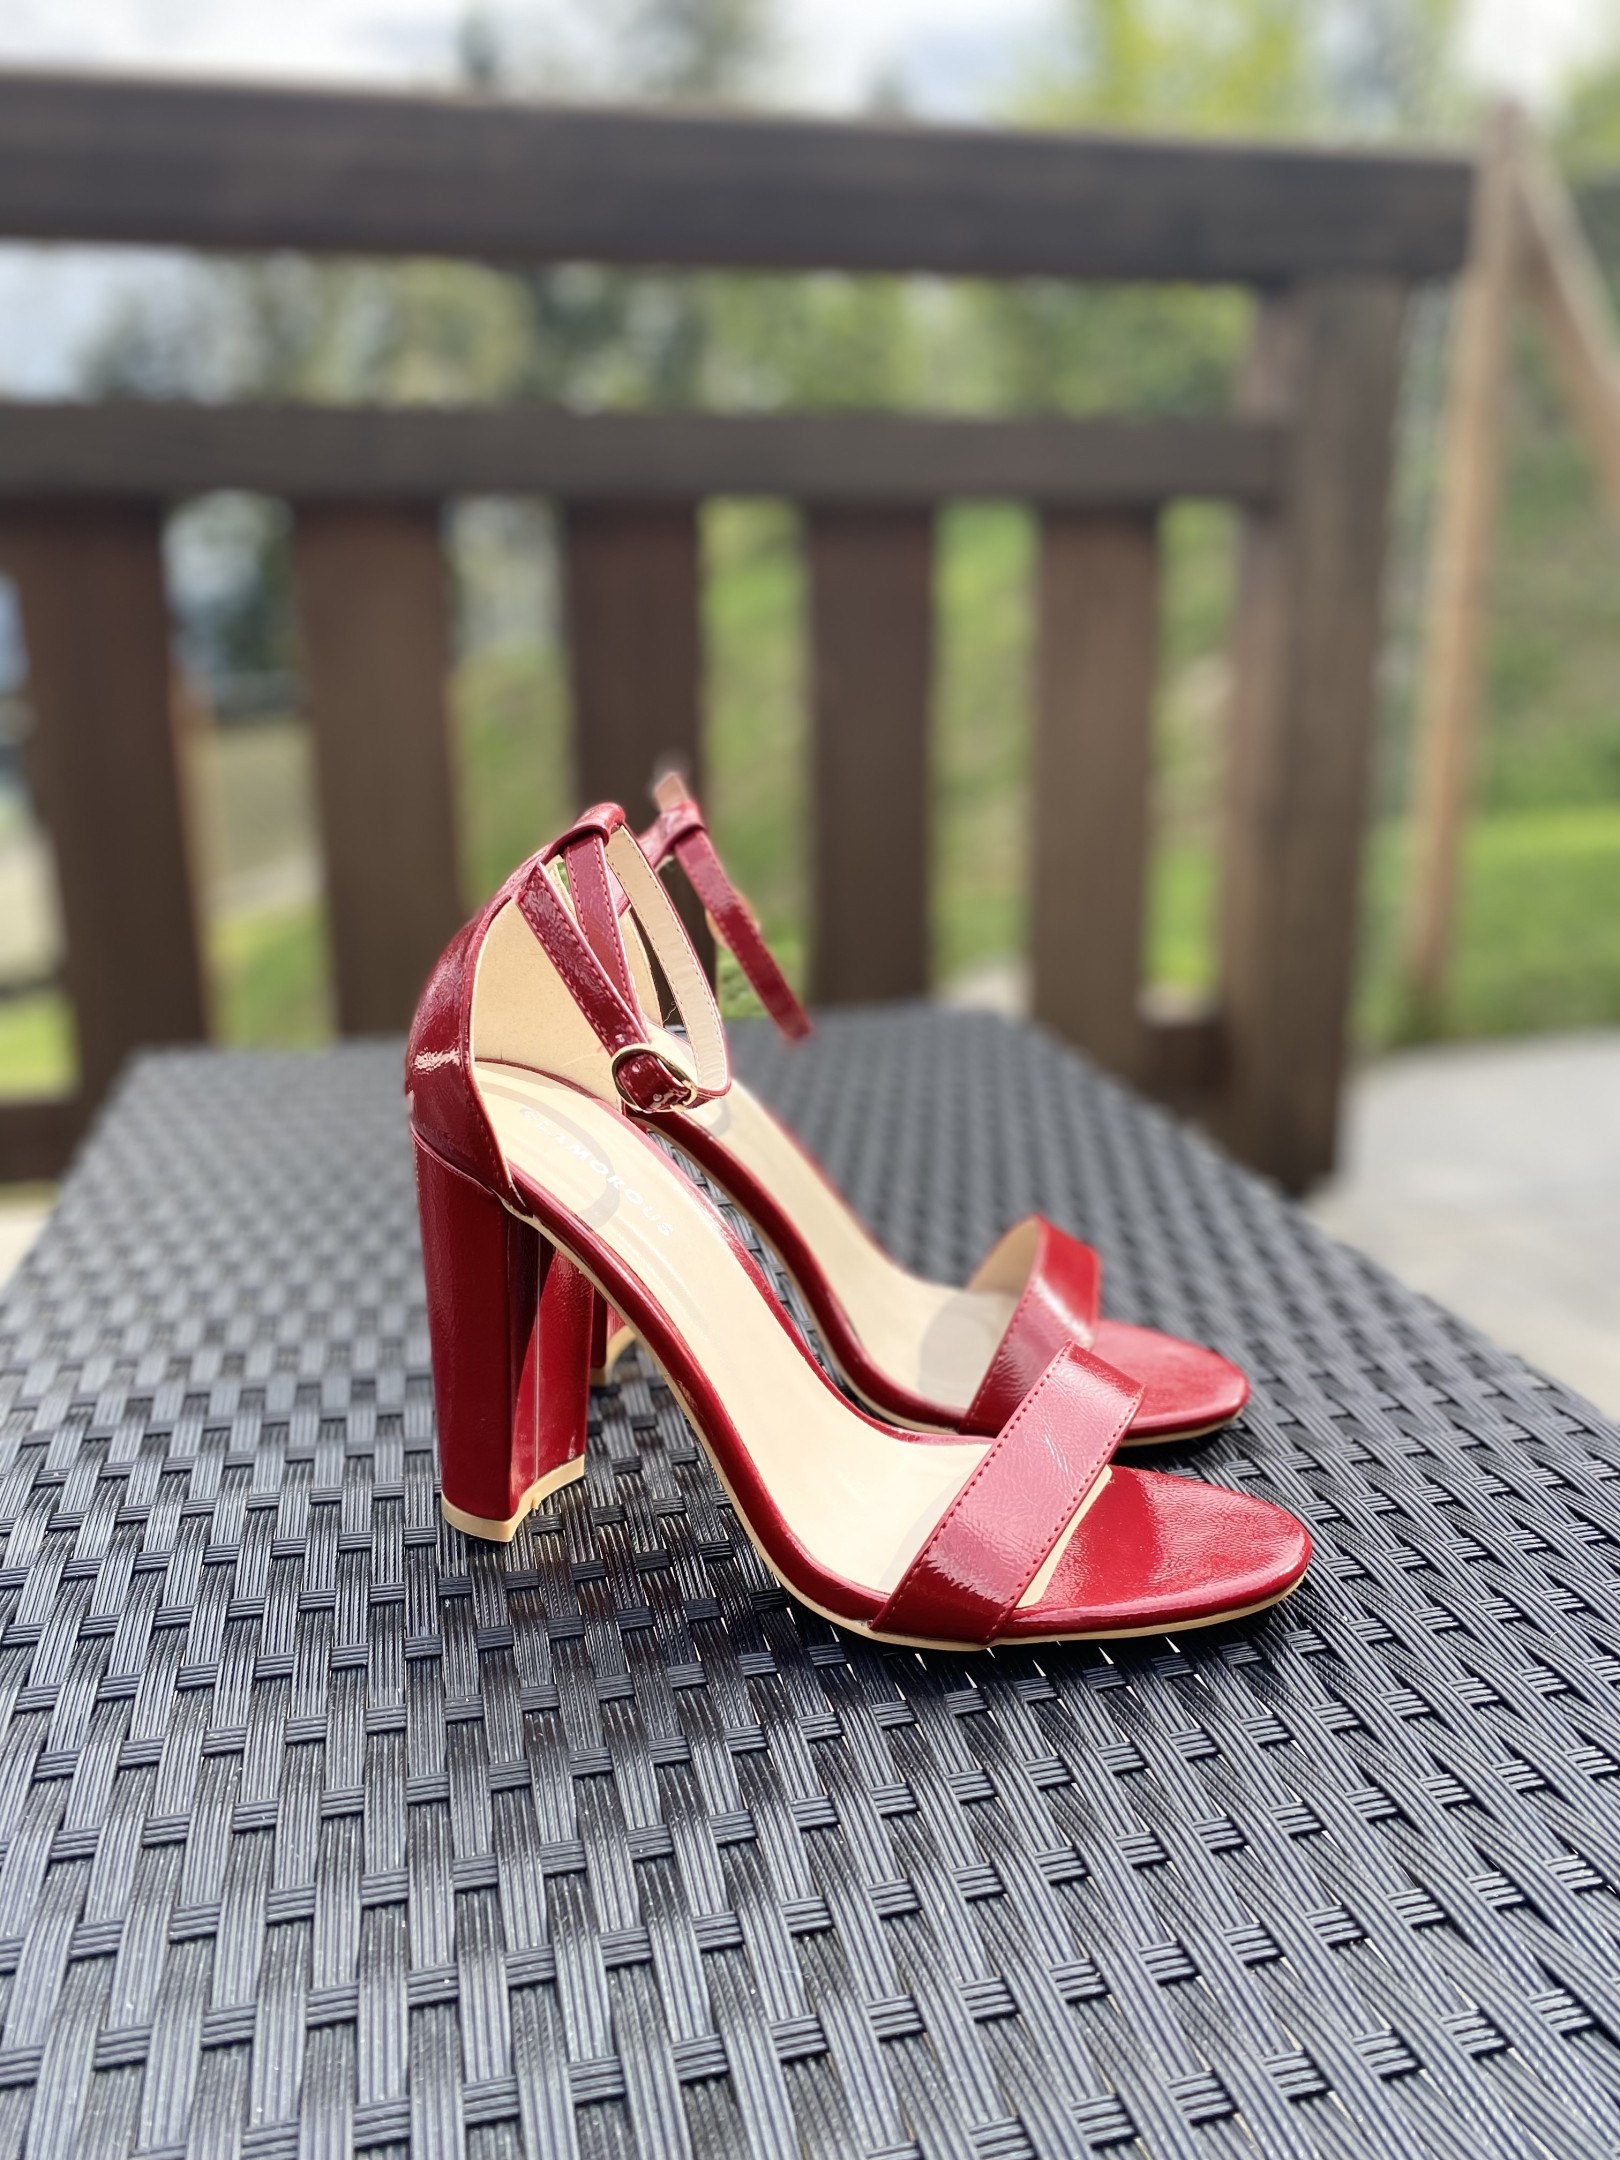 Red patent pumps